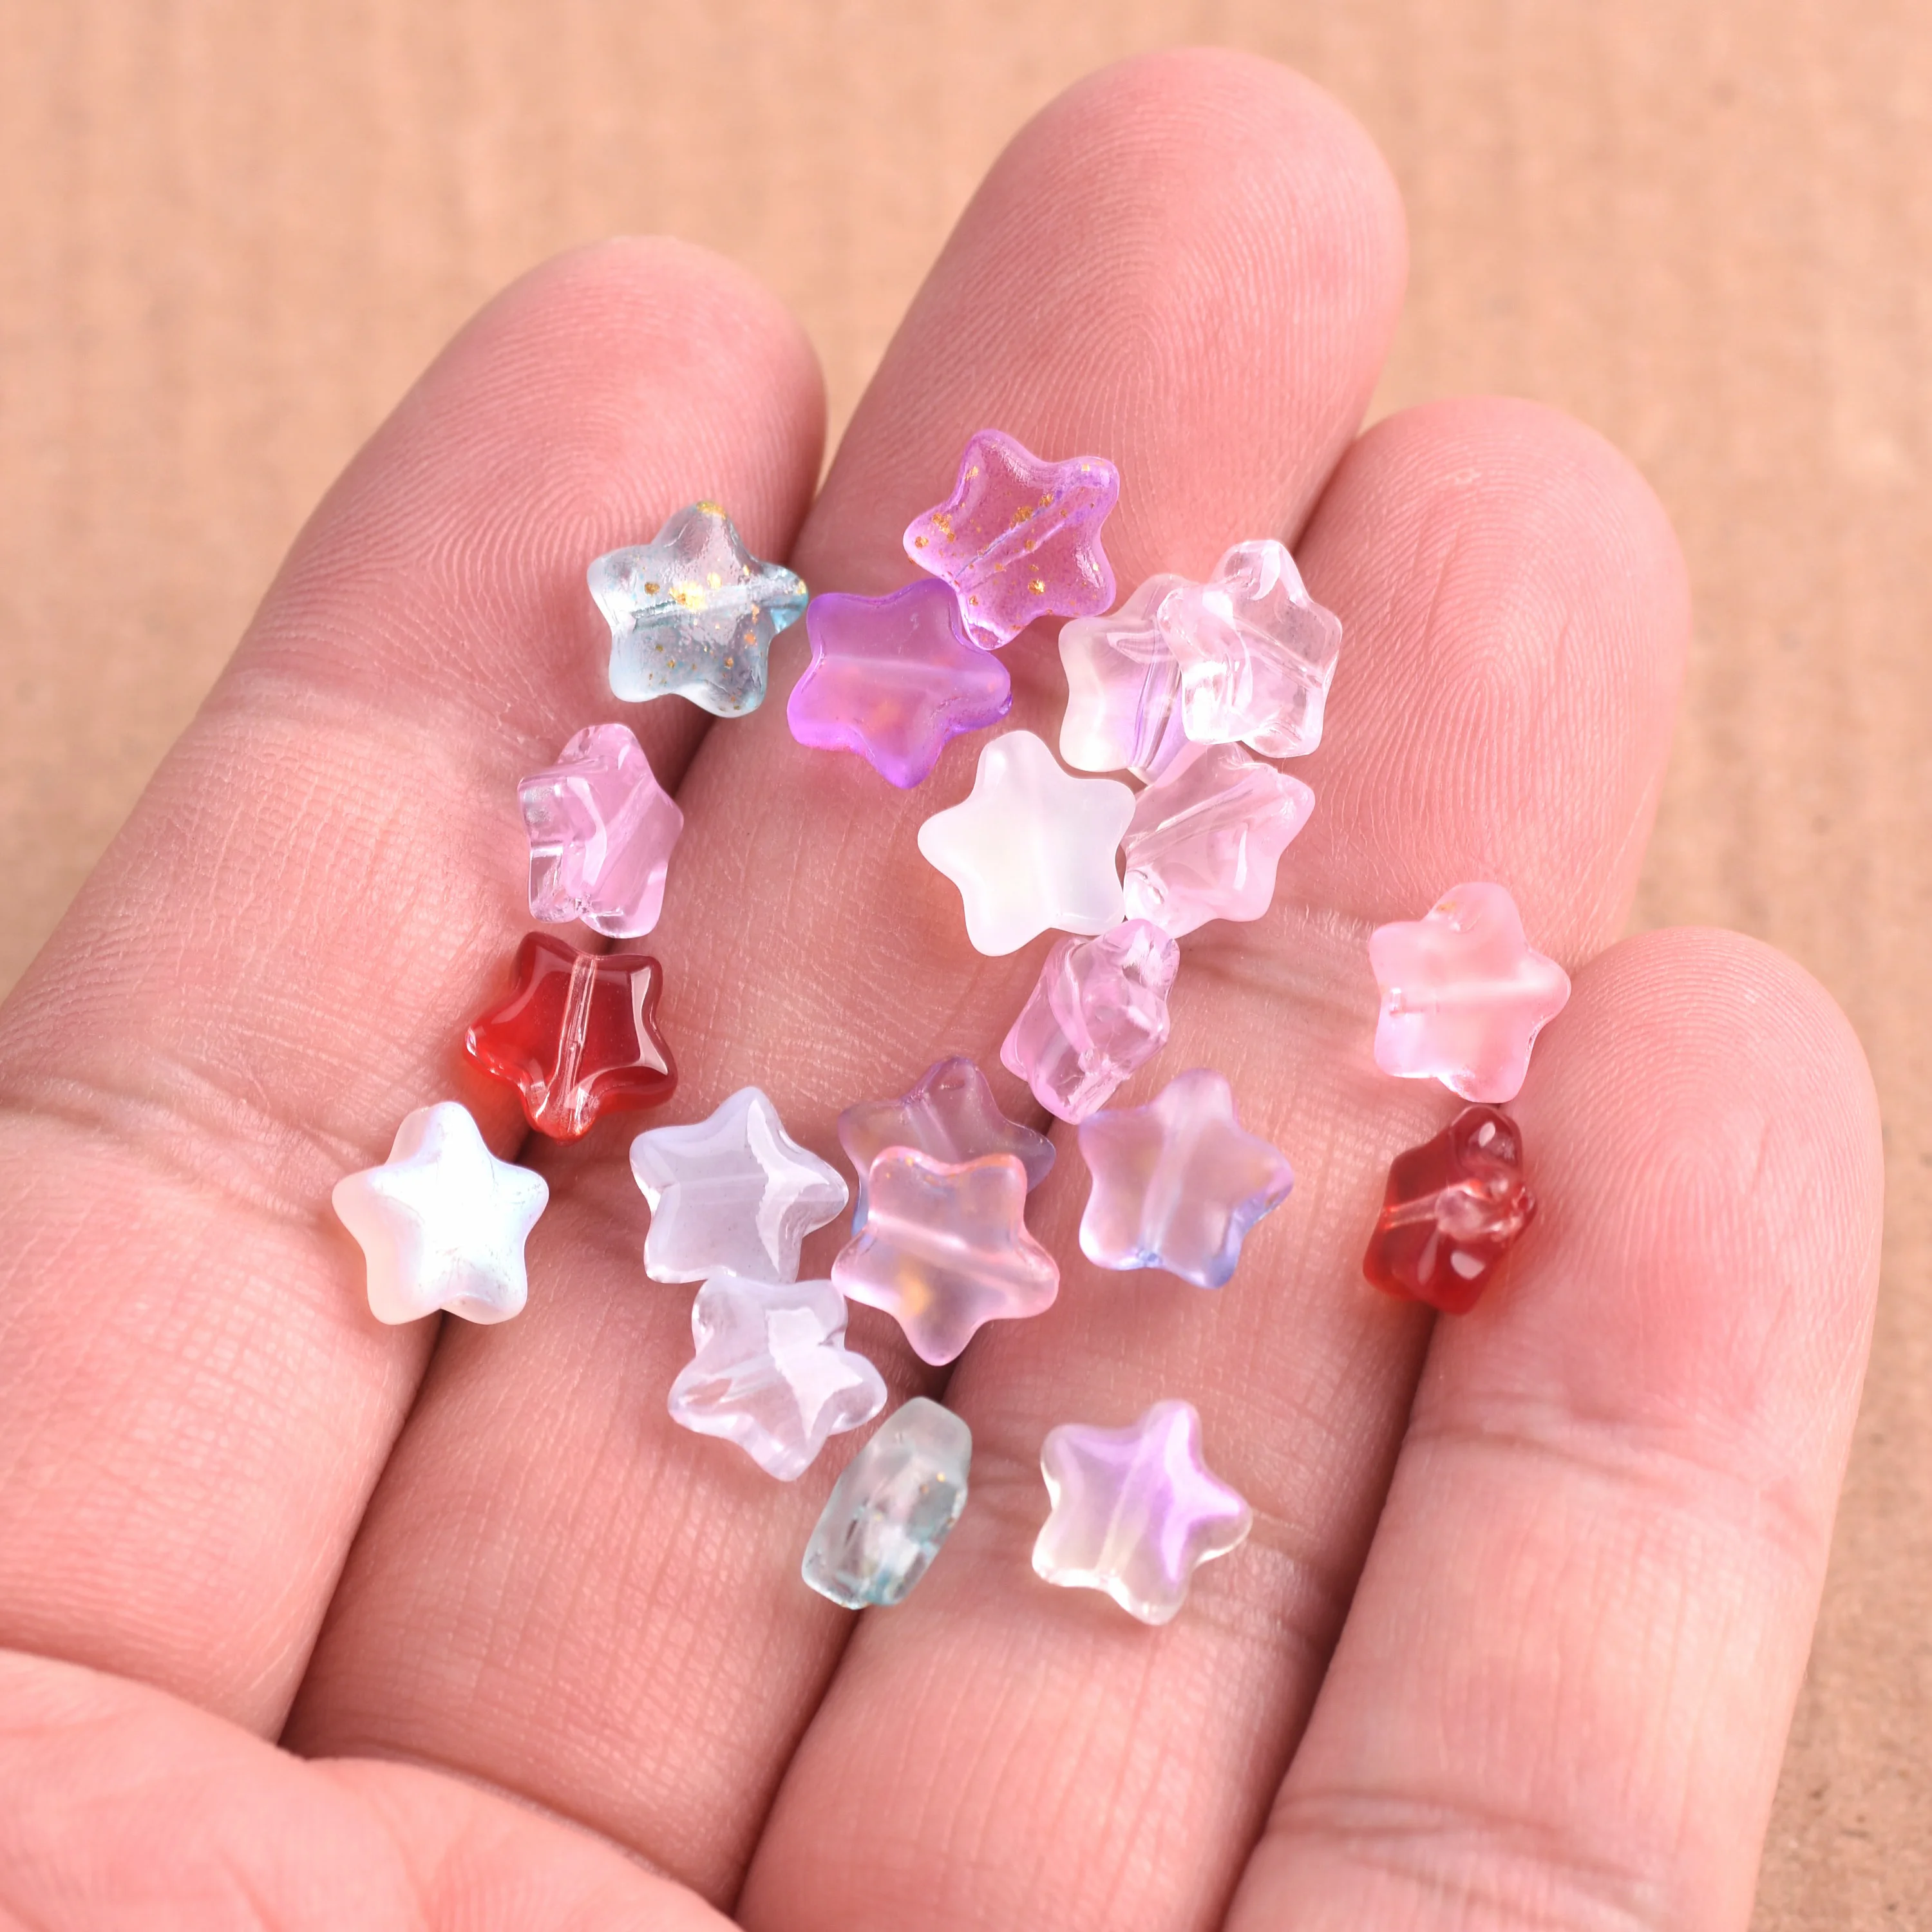 20pcs 8mm Small Star Shape Colorful Lampwork Crystal Glass Loose Beads for Jewelry Making DIY Crafts Findings